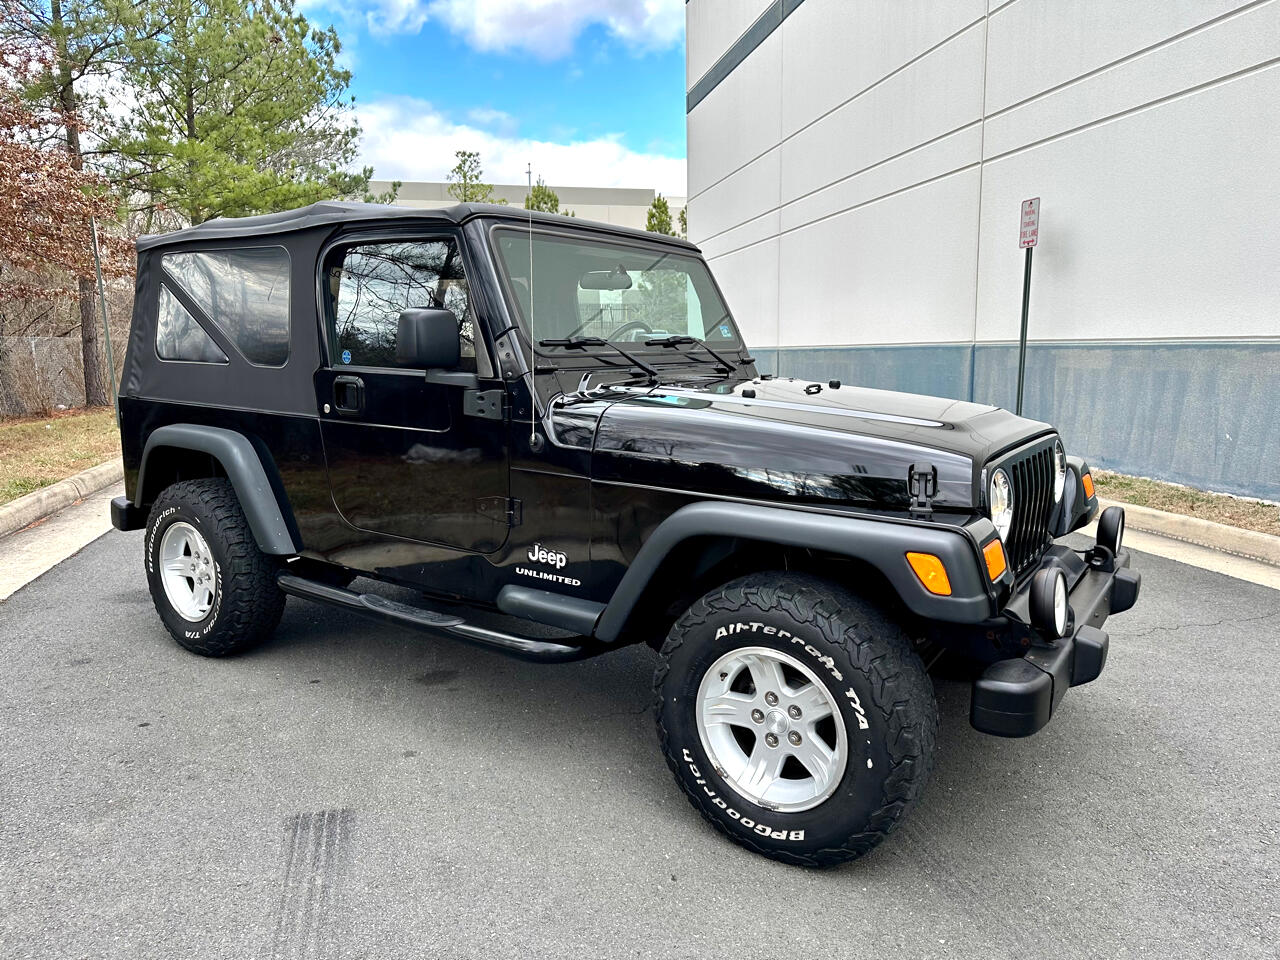 Used 2005 Jeep Wrangler Unlimited for Sale in Chantilly VA 20152 Dulles  Auto Sales